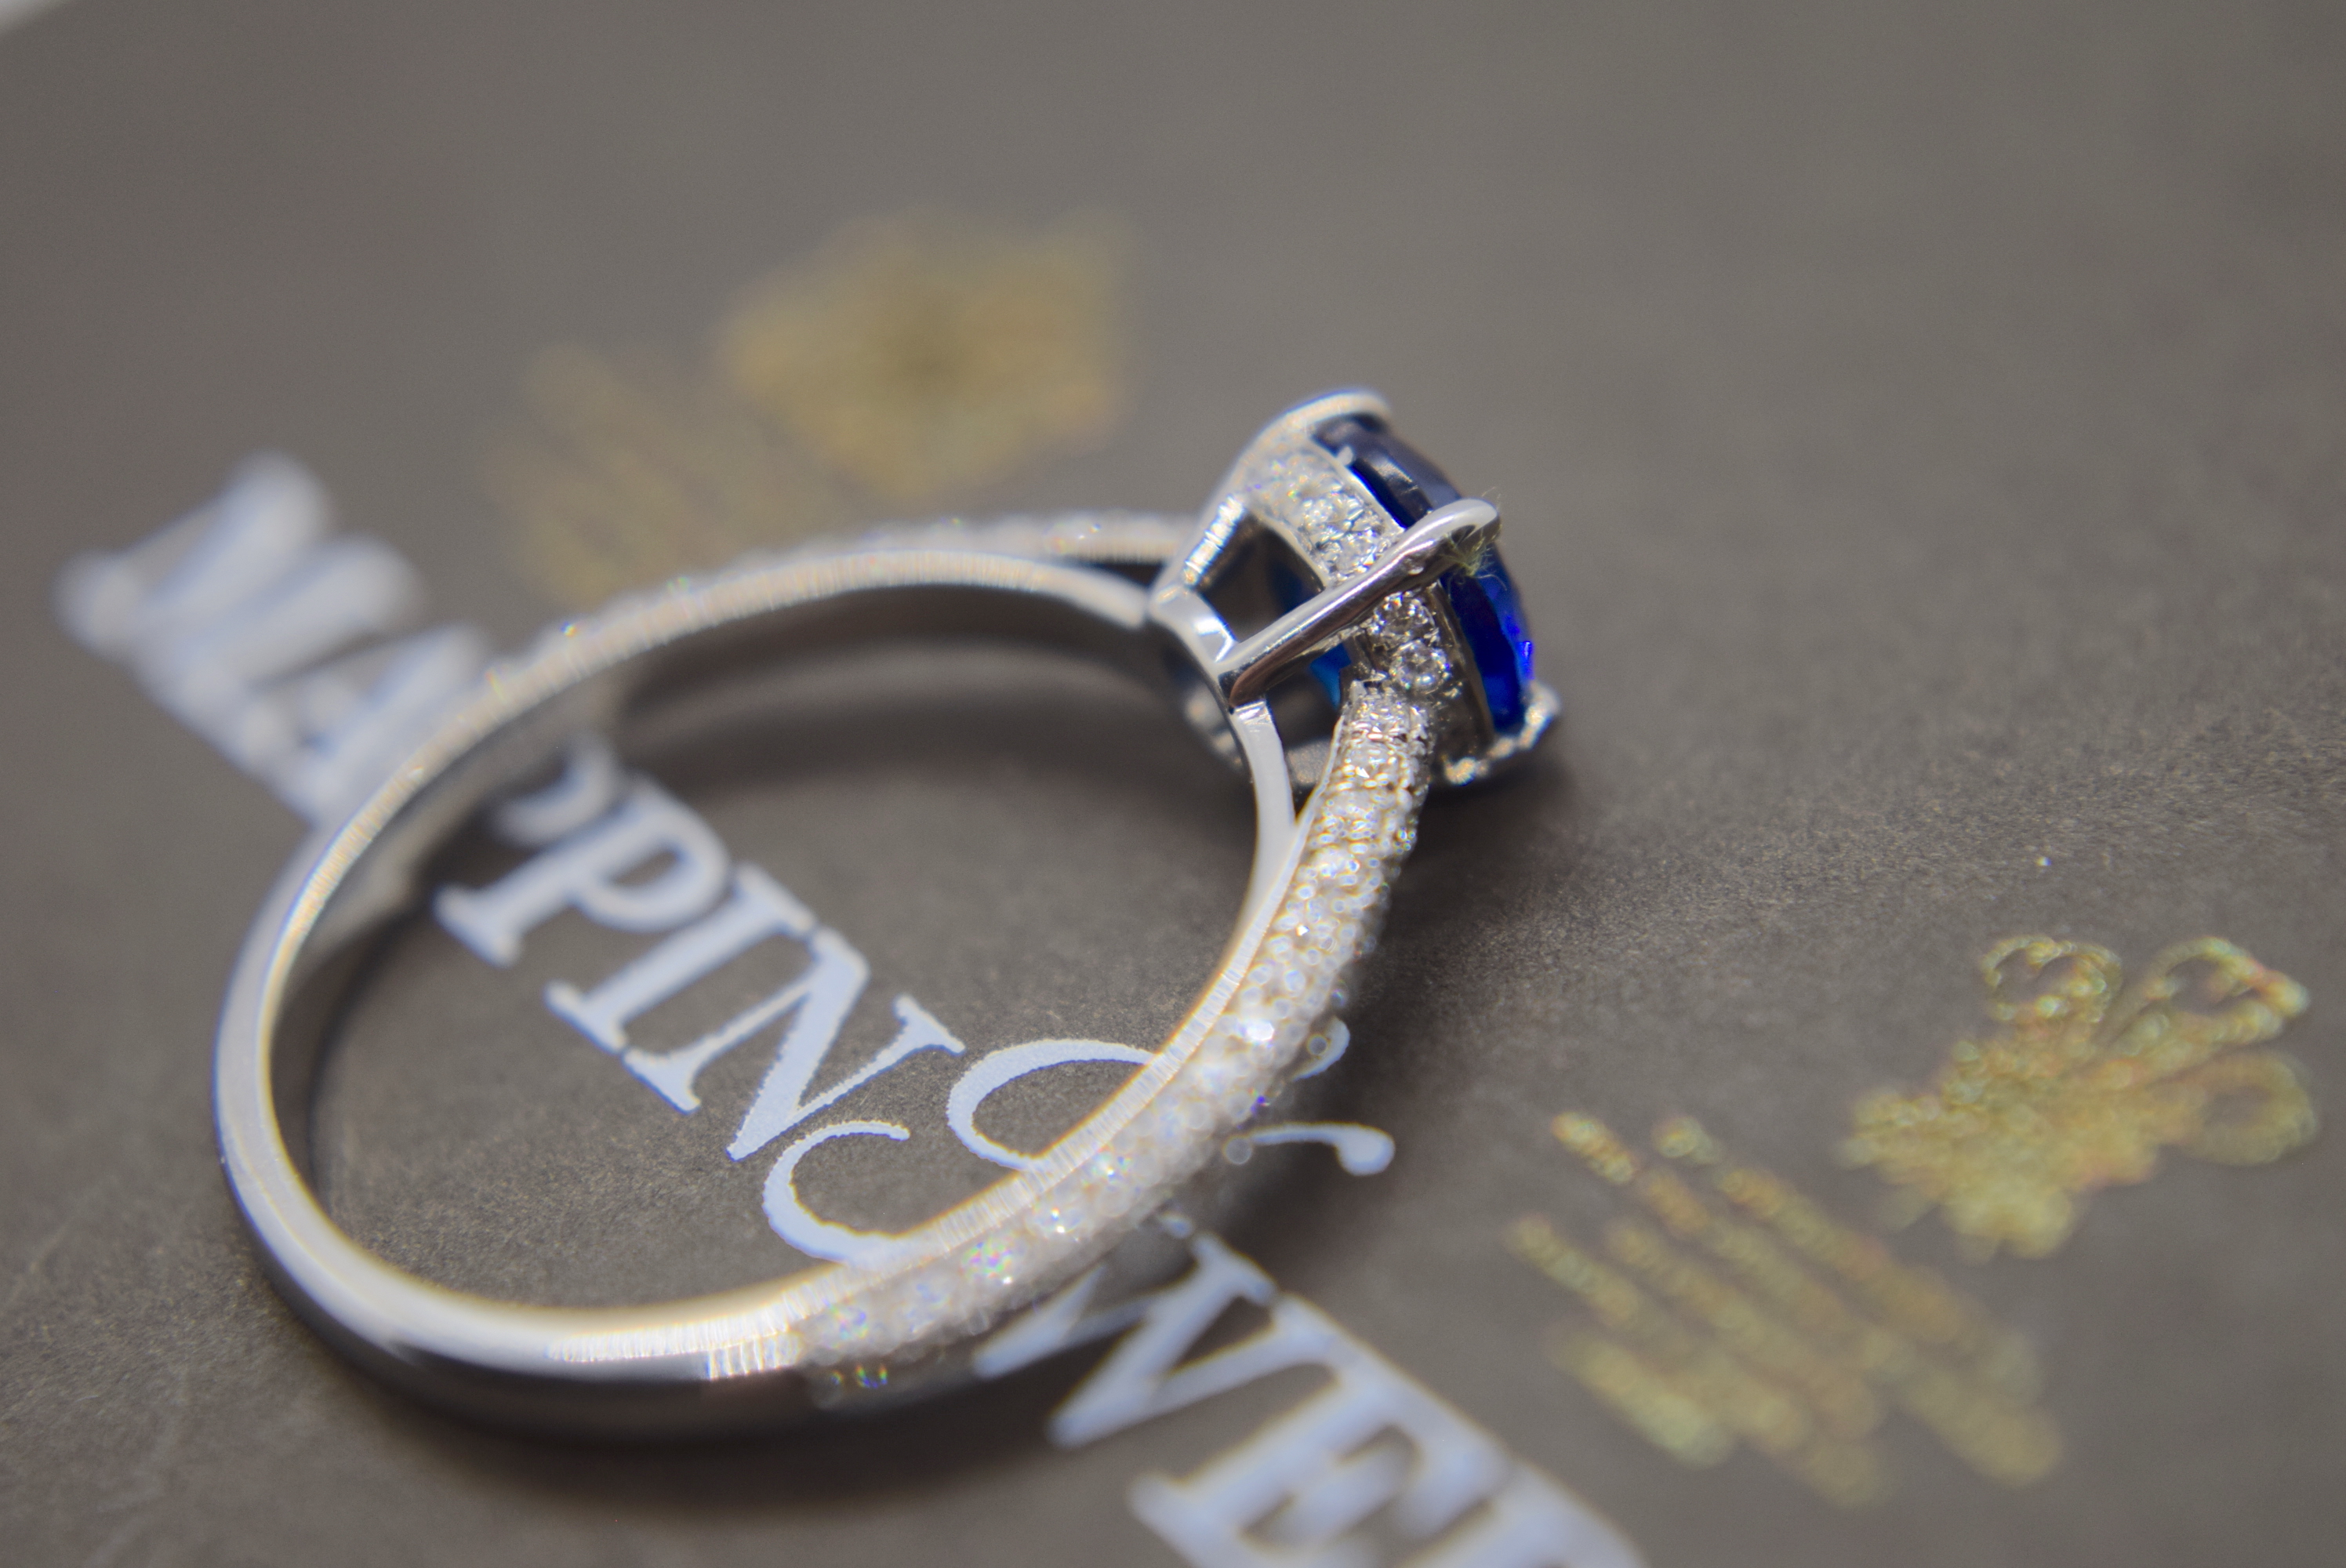 1.50CT BLUE SAPPHIRE AND DIAMOND RING IN 18K WHITE GOLD - SIZE M 1/2 - Image 2 of 2